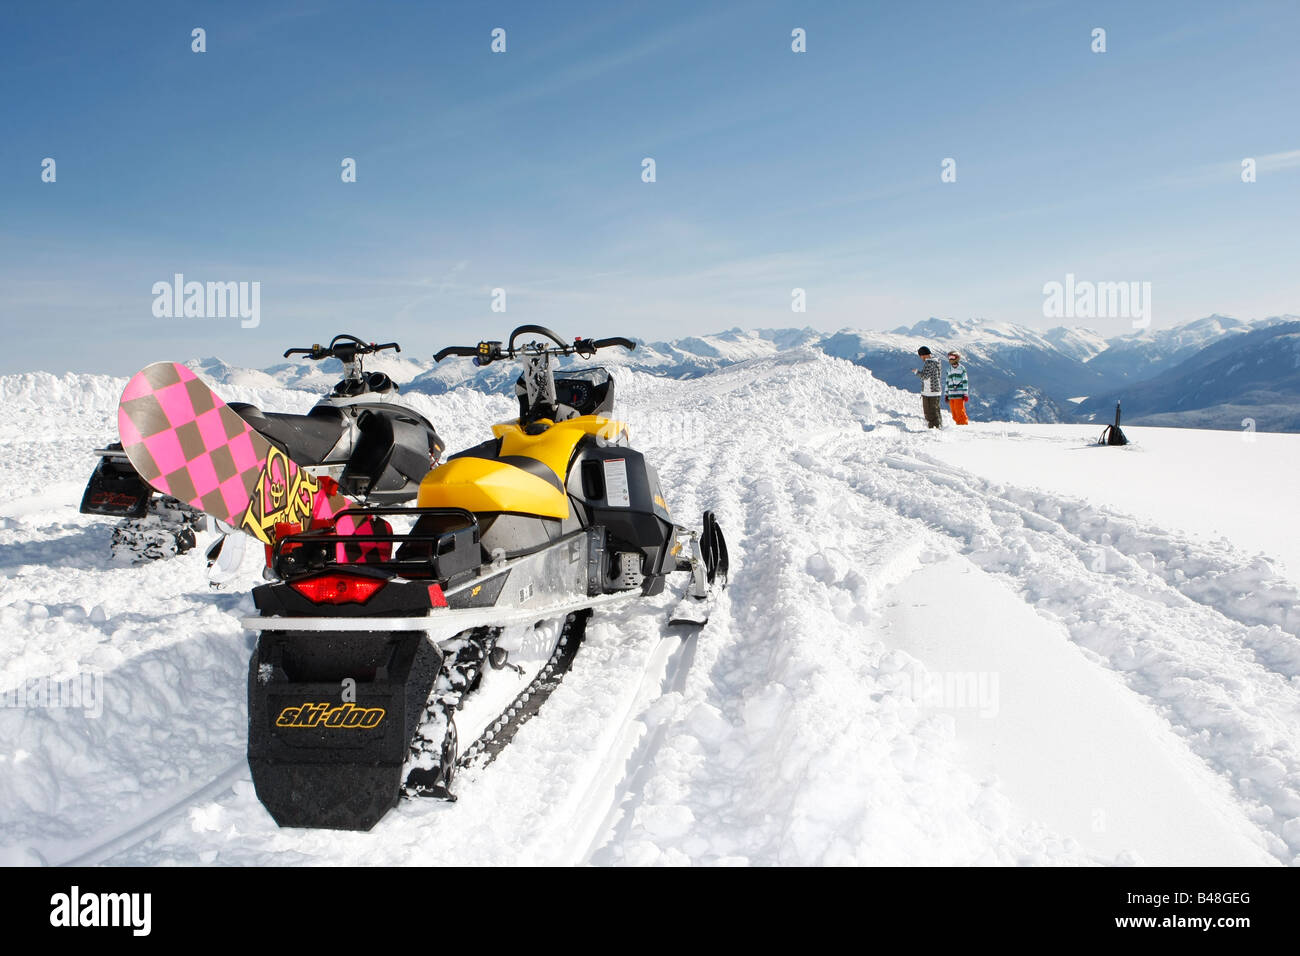 2 snowmobiles used for transporting snowboarders up the mountain Stock Photo